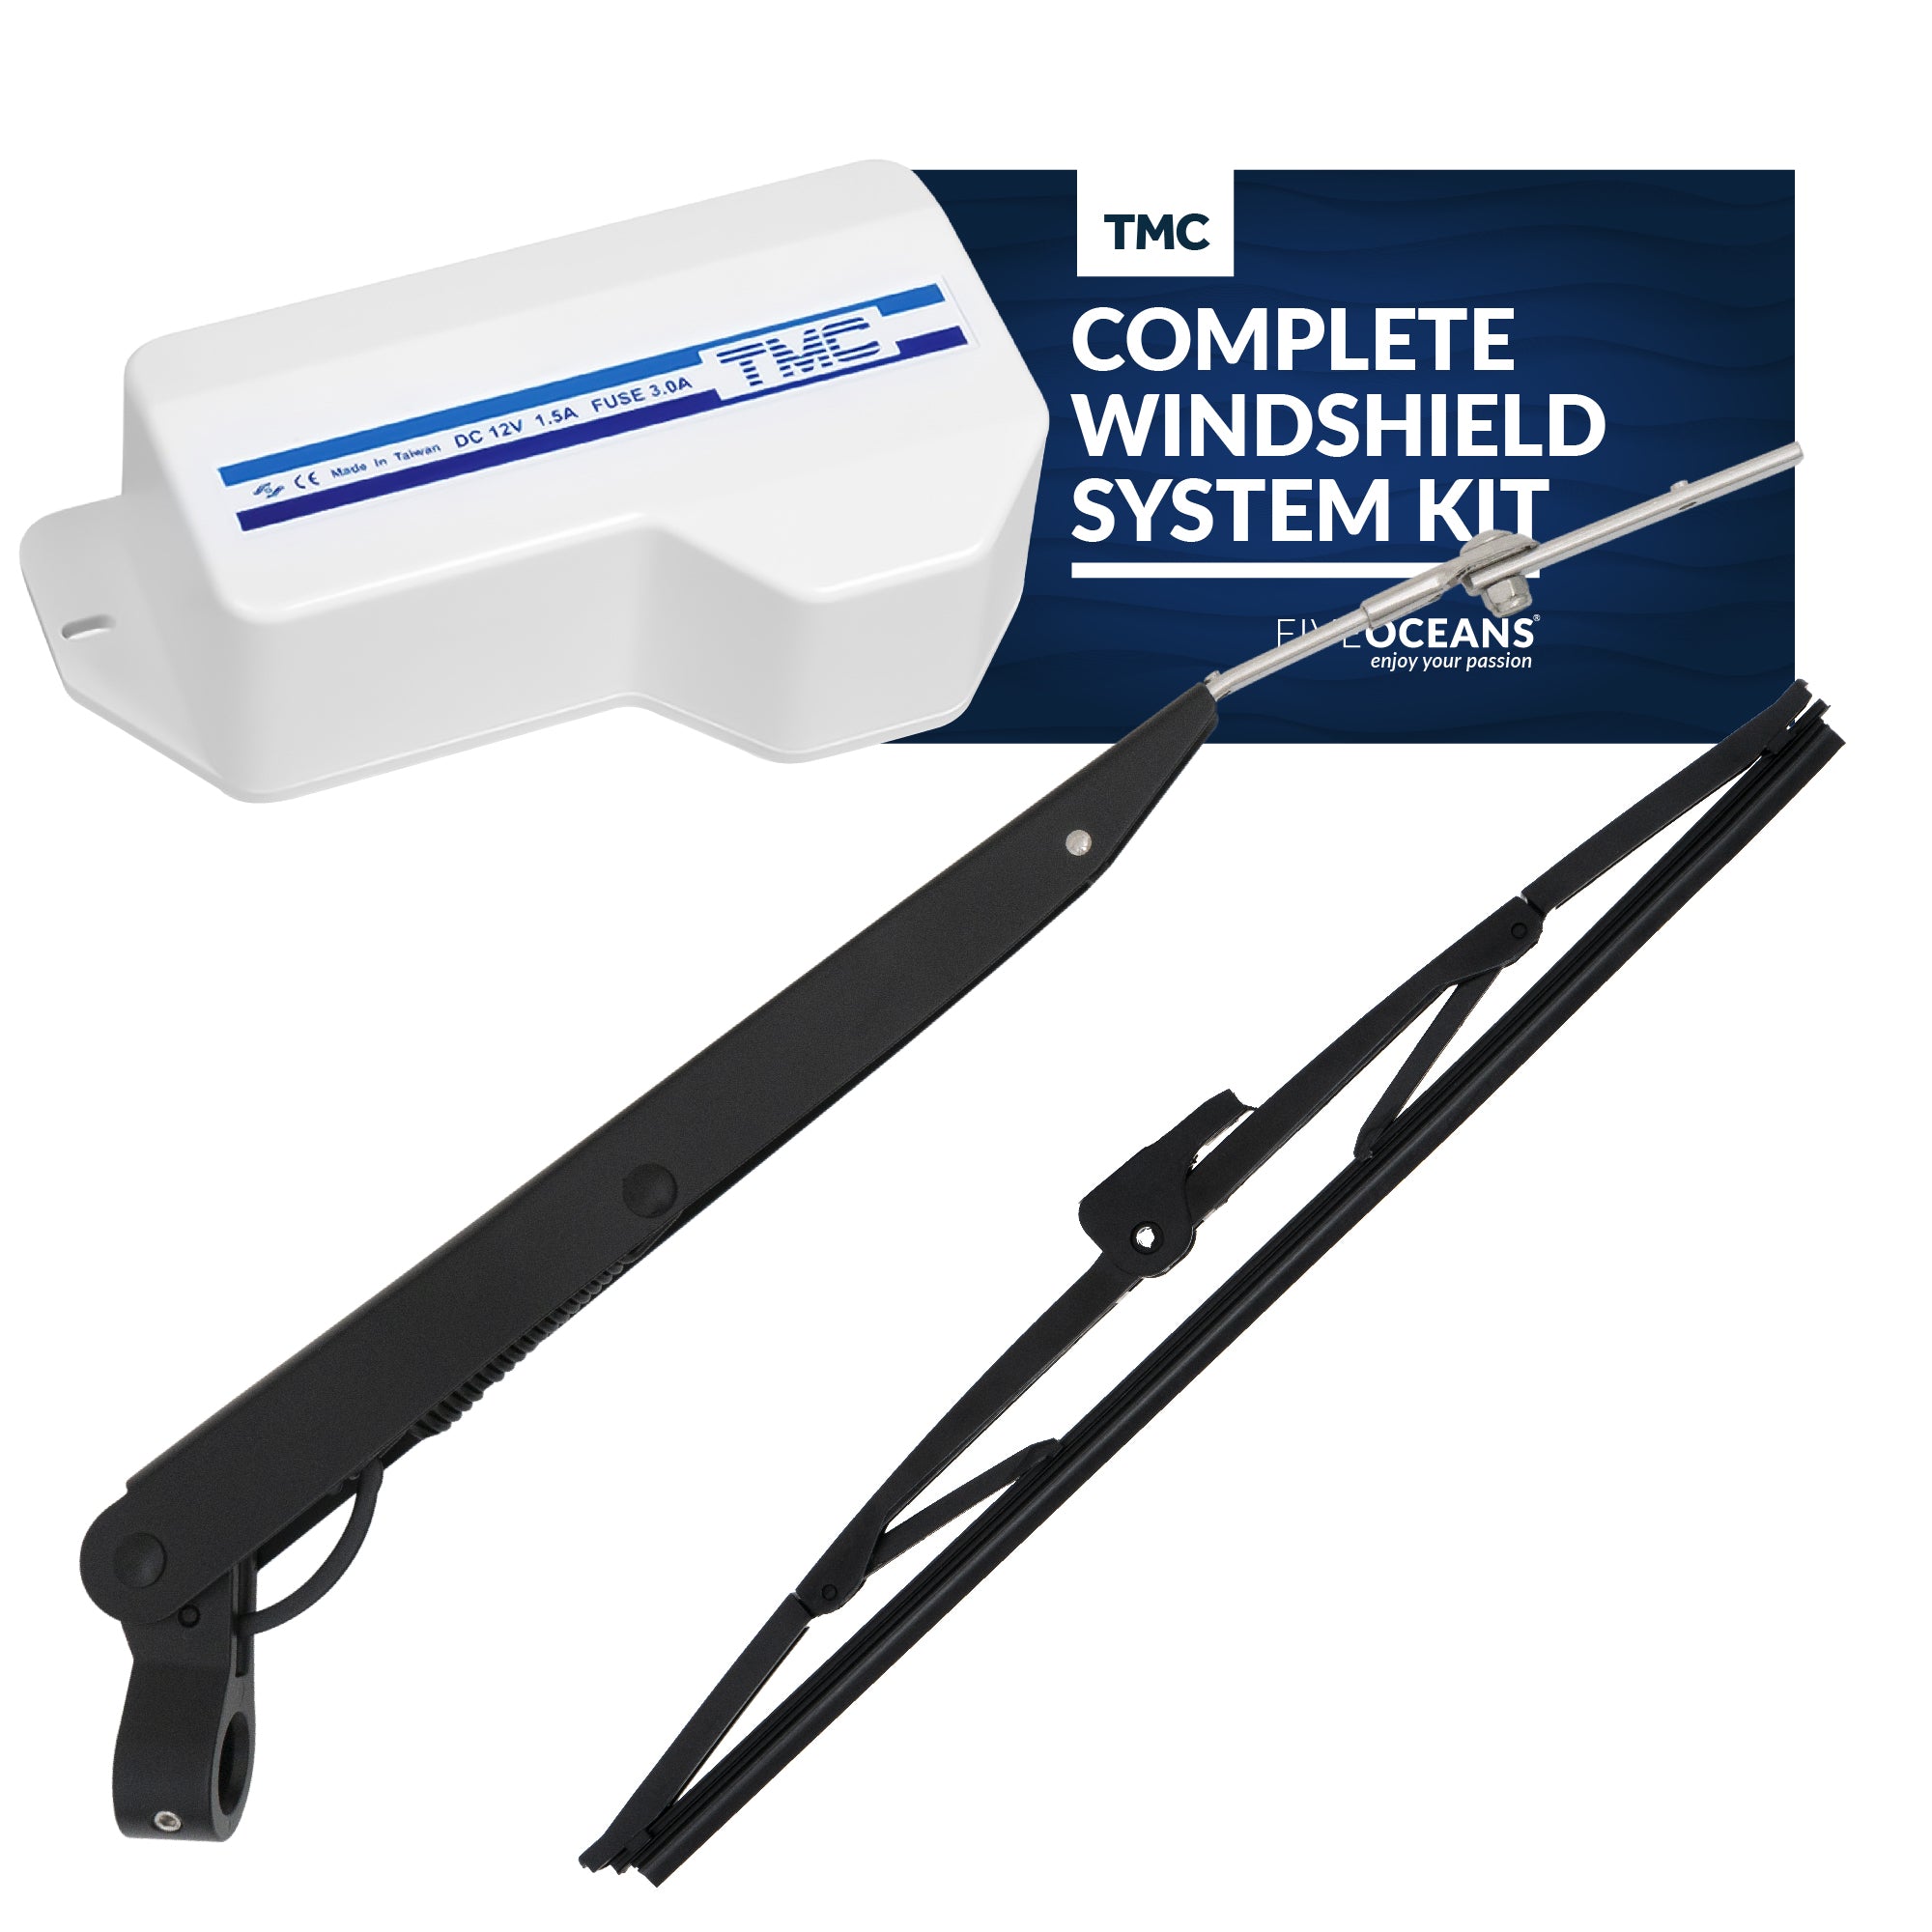 TMC Complete Windshield System Kit  - FO746-C2